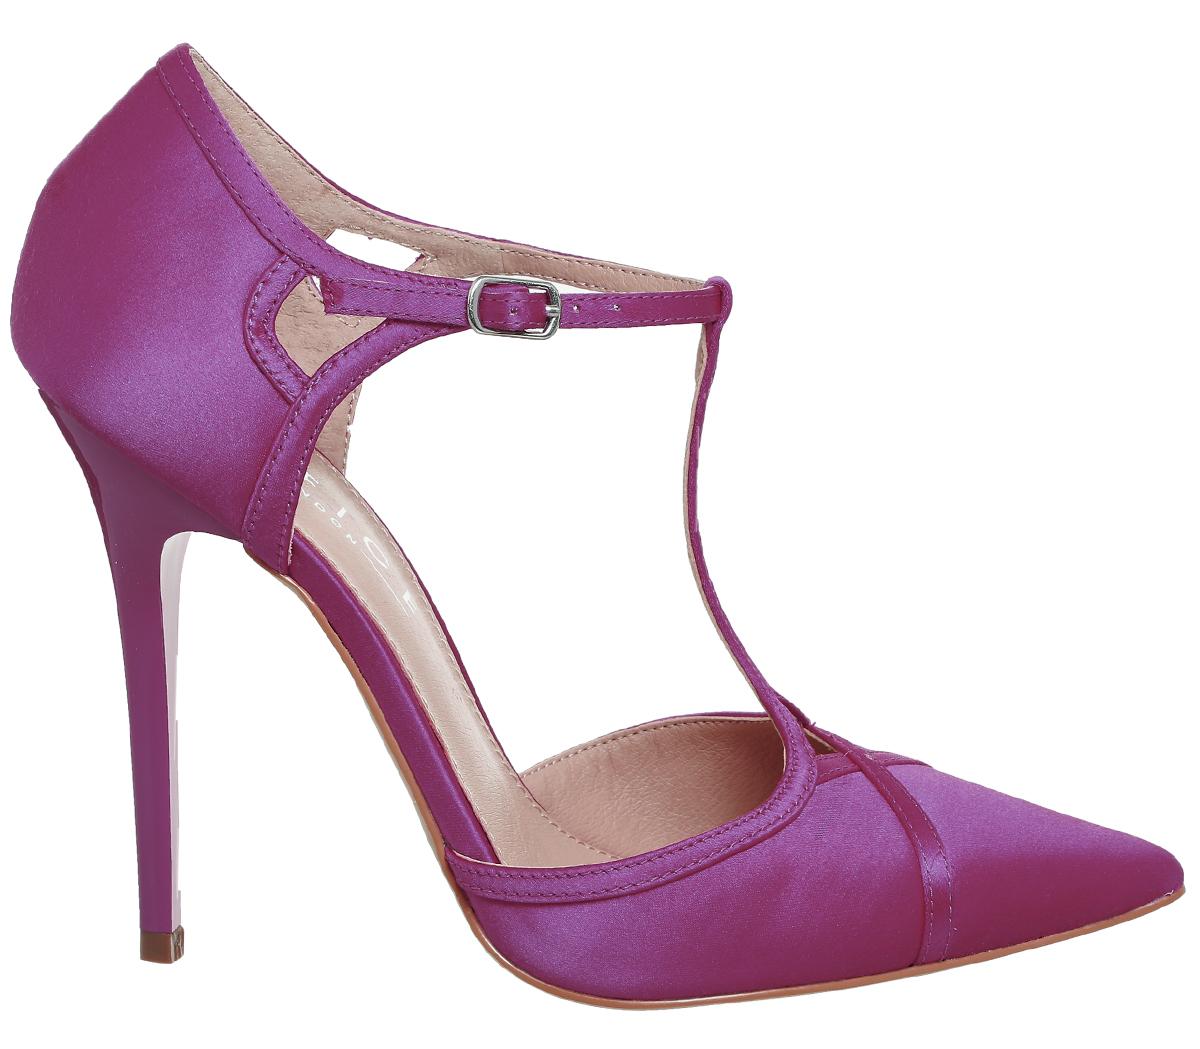 OFFICE Hierarchy T Bar Point Courts Pink Satin - High Heels